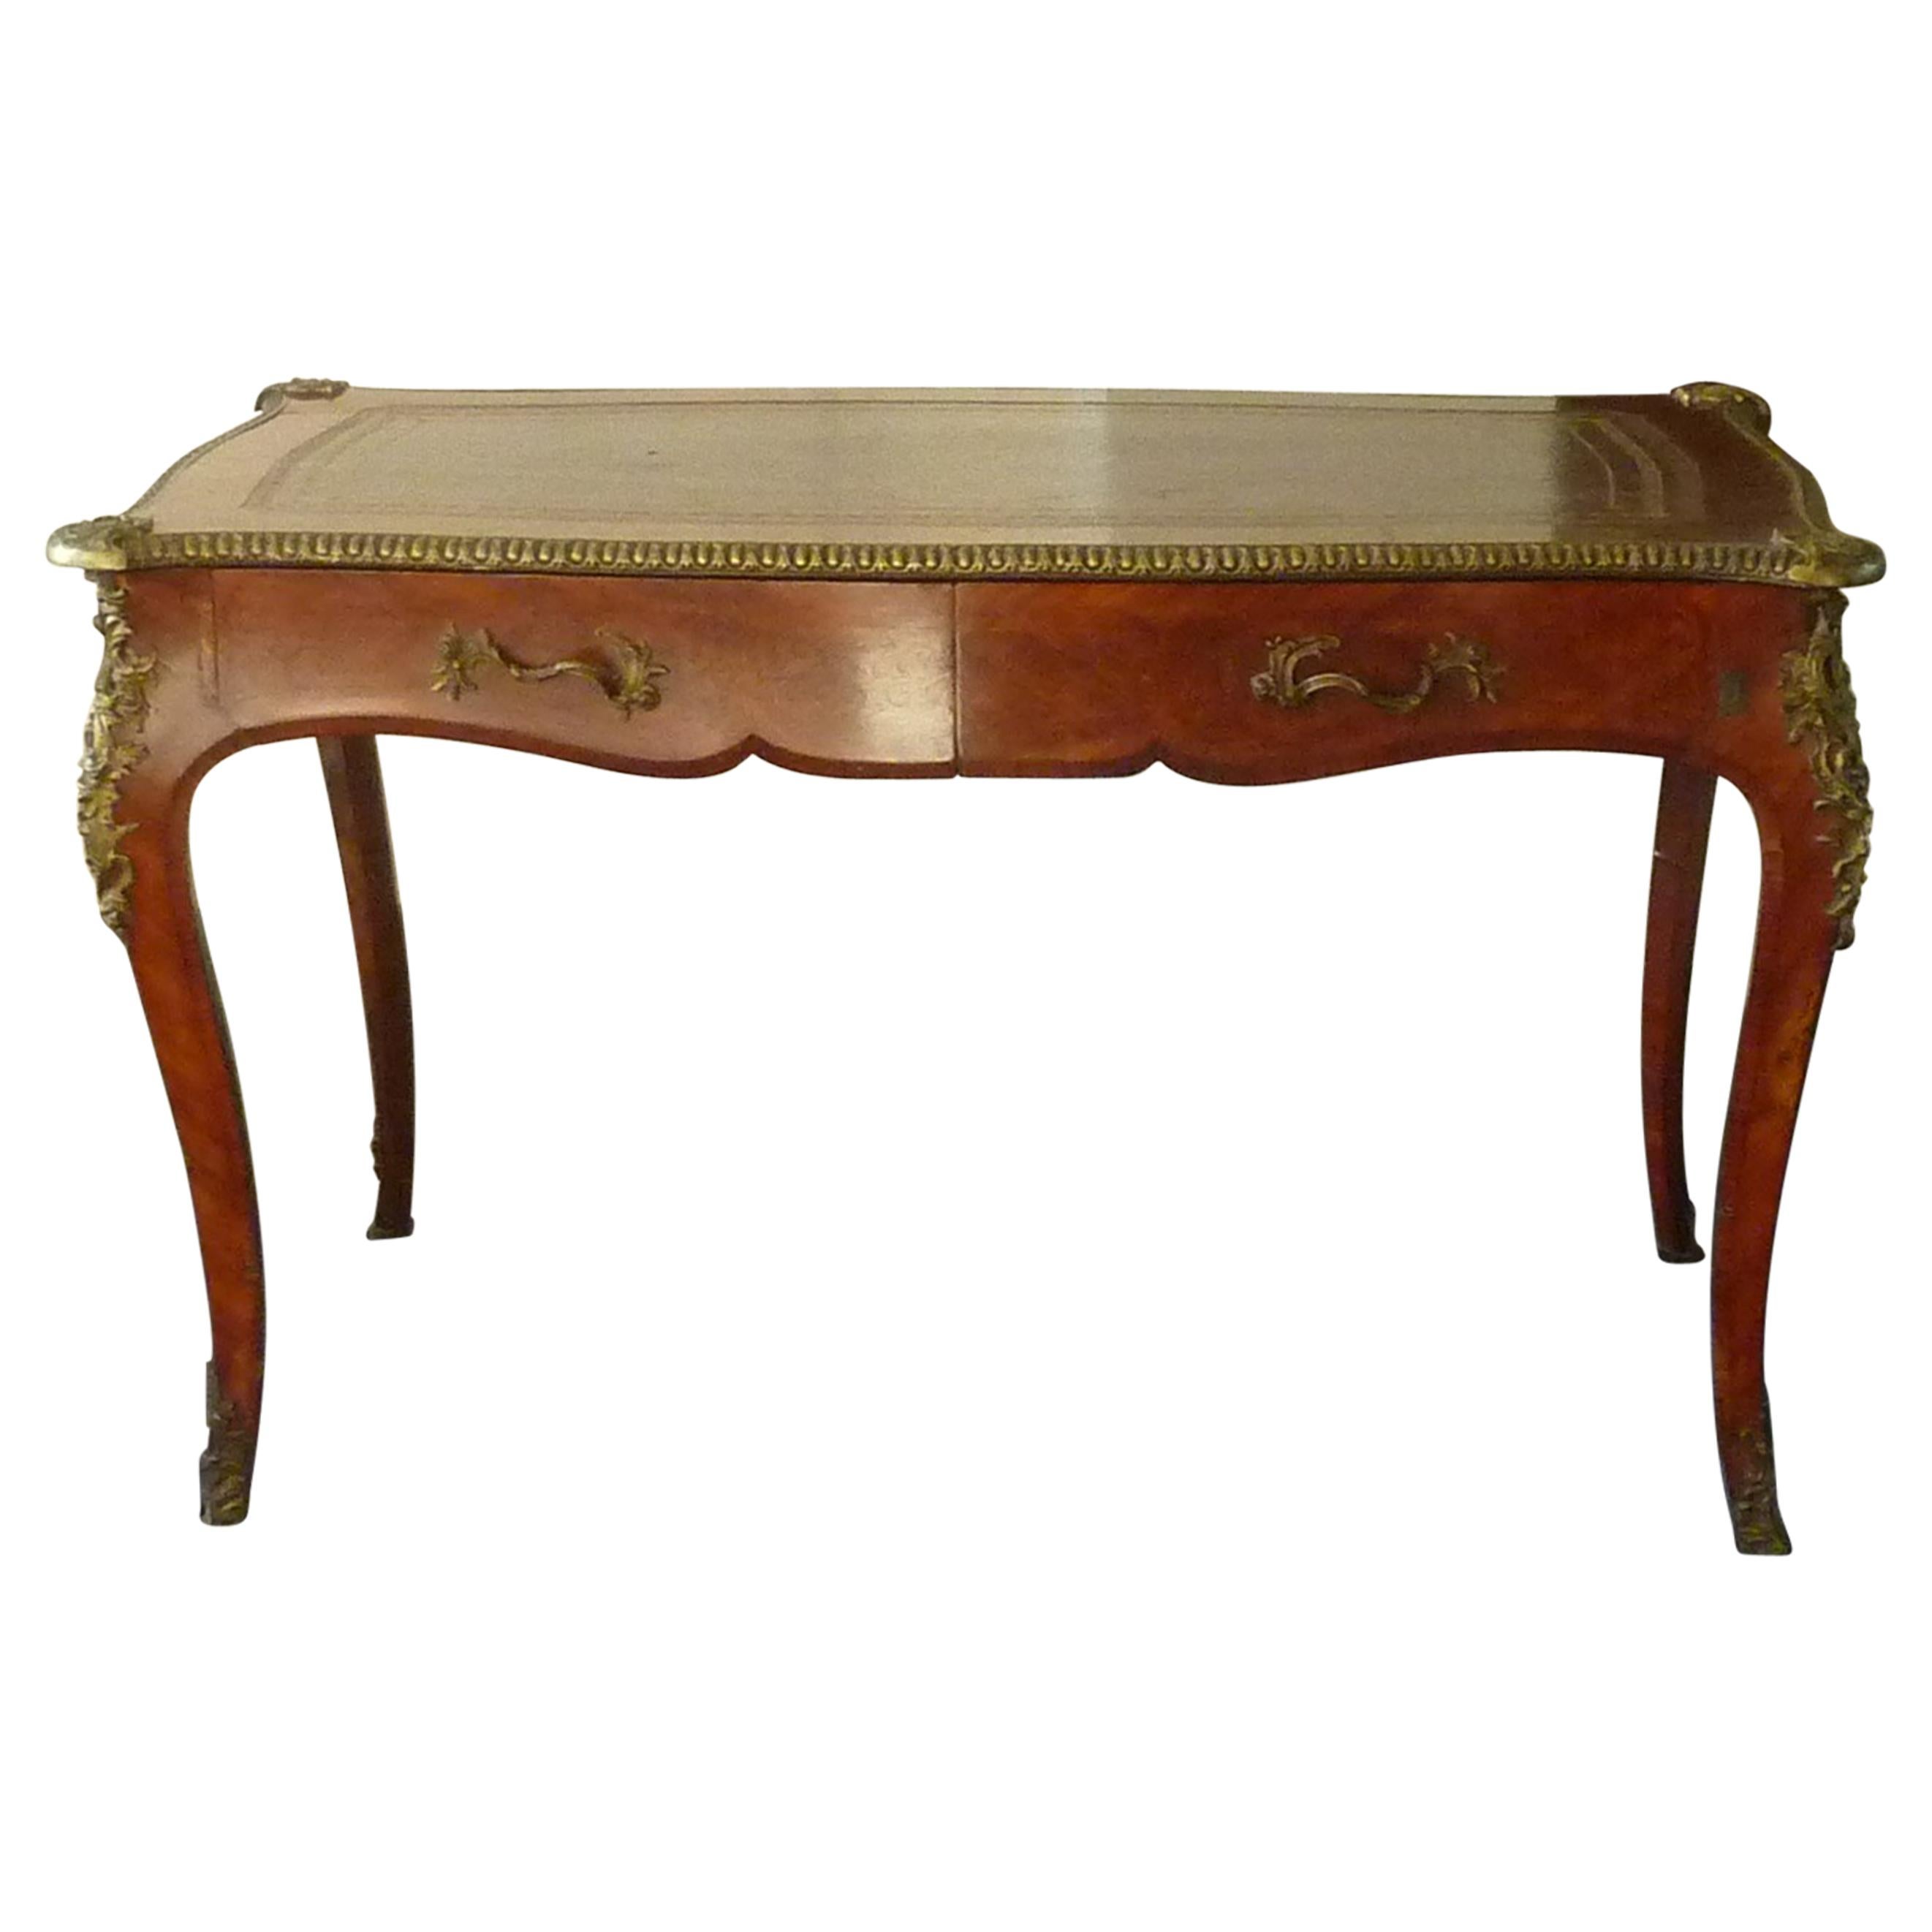 19th Century Rococo Louis XV Style Mahogany Flat Desk by James Winter and Sons For Sale